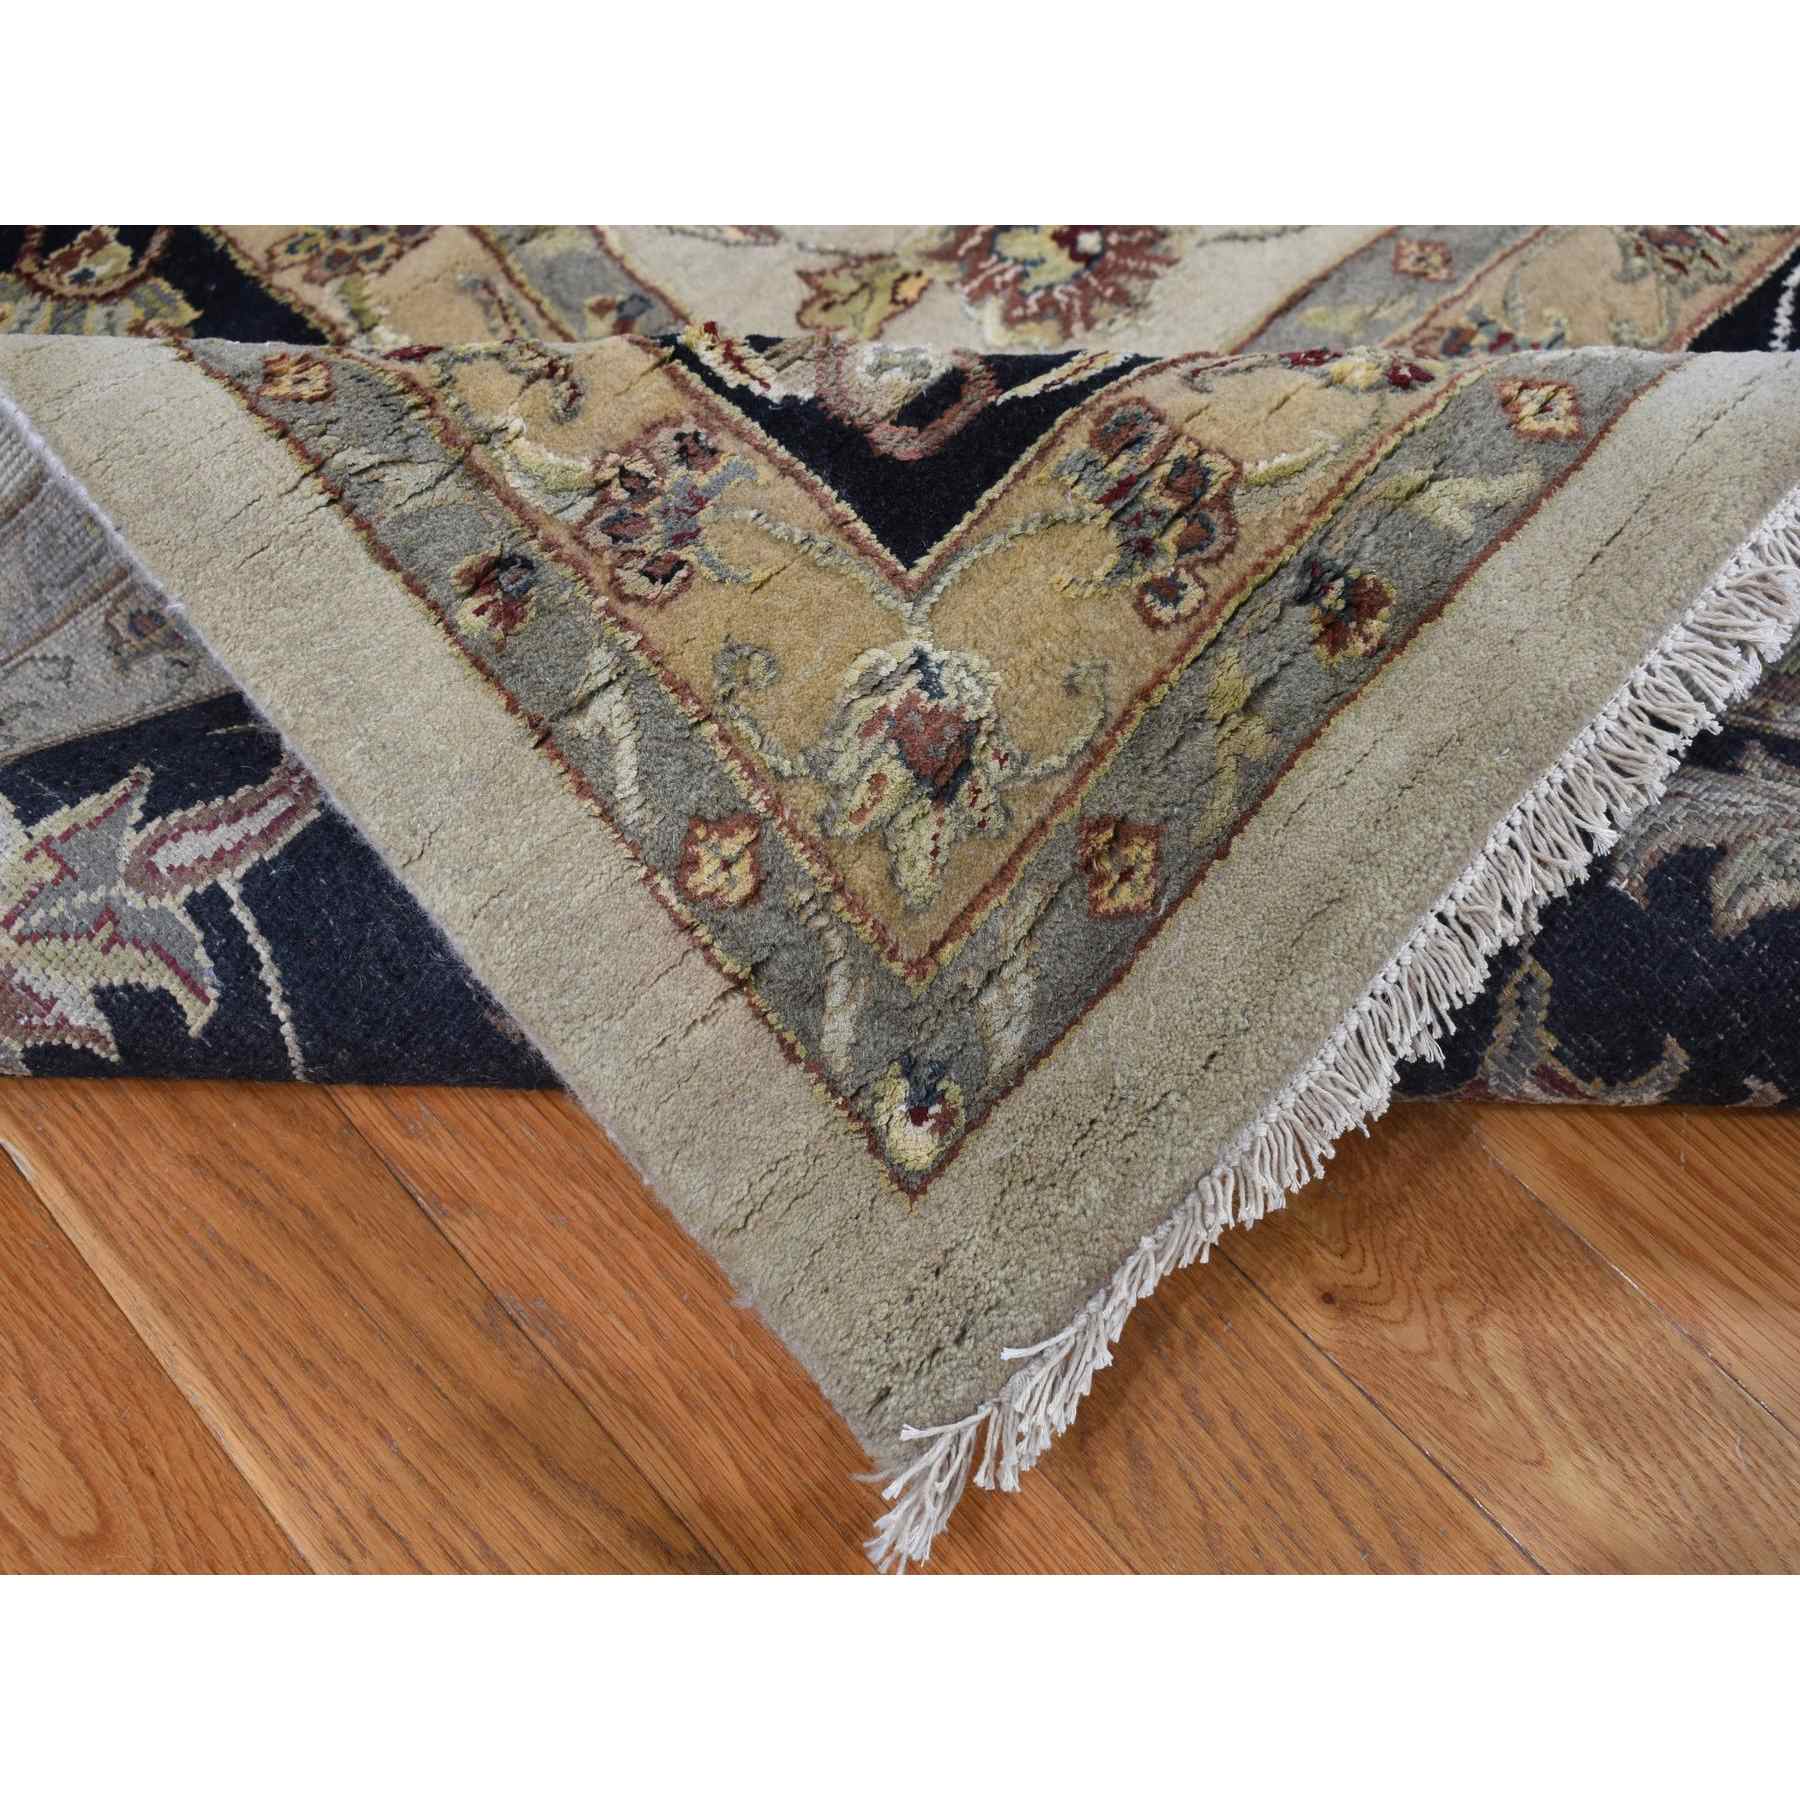 Rajasthan-Hand-Knotted-Rug-438330